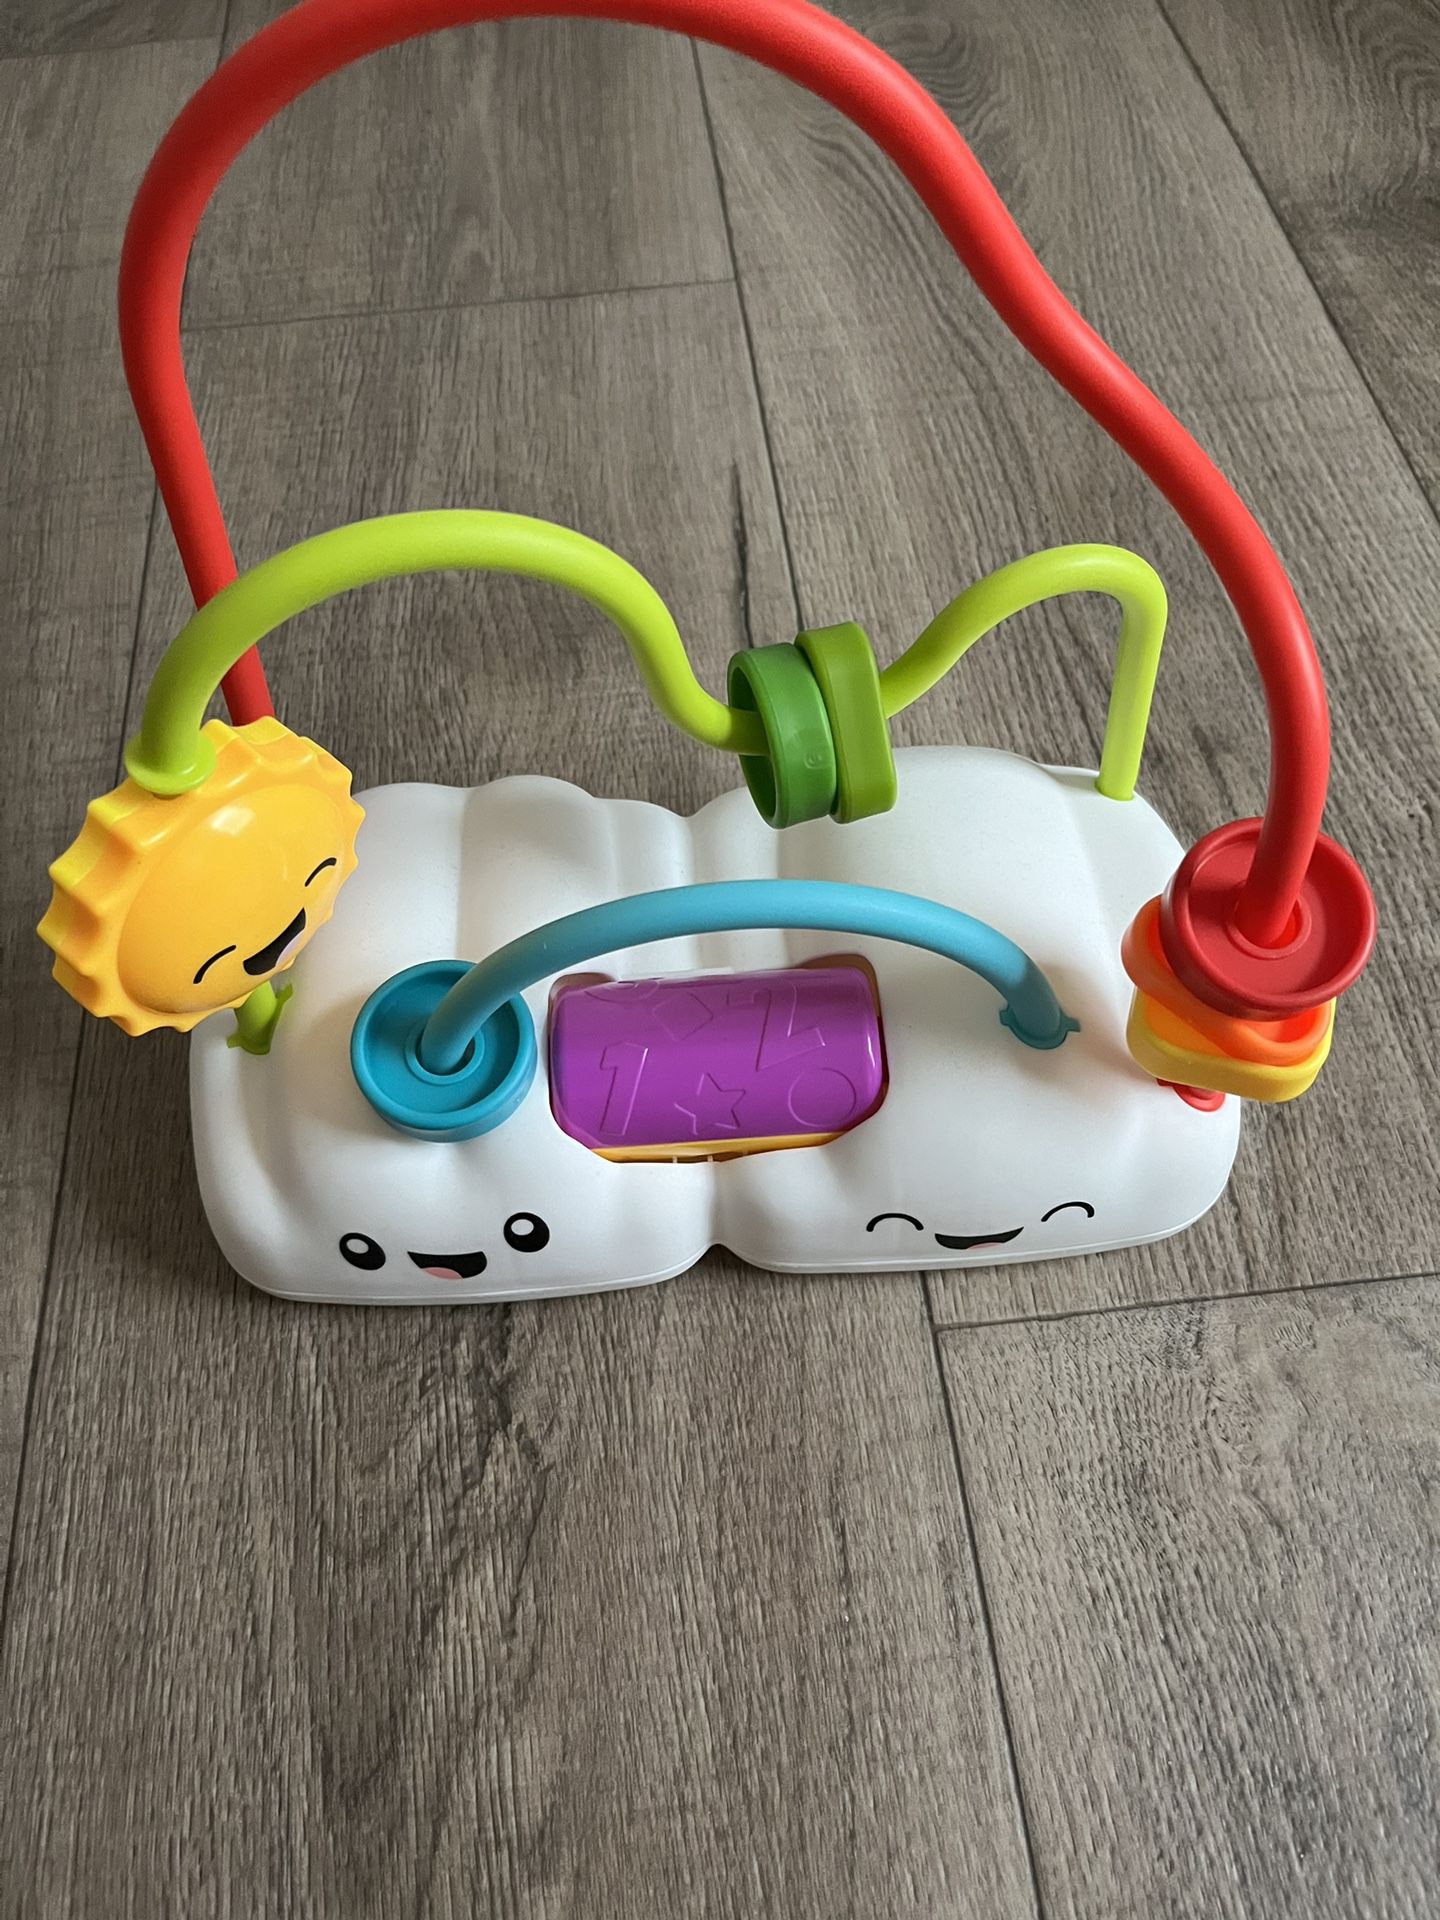 Fisher price baby  Cloud Rainbow toy